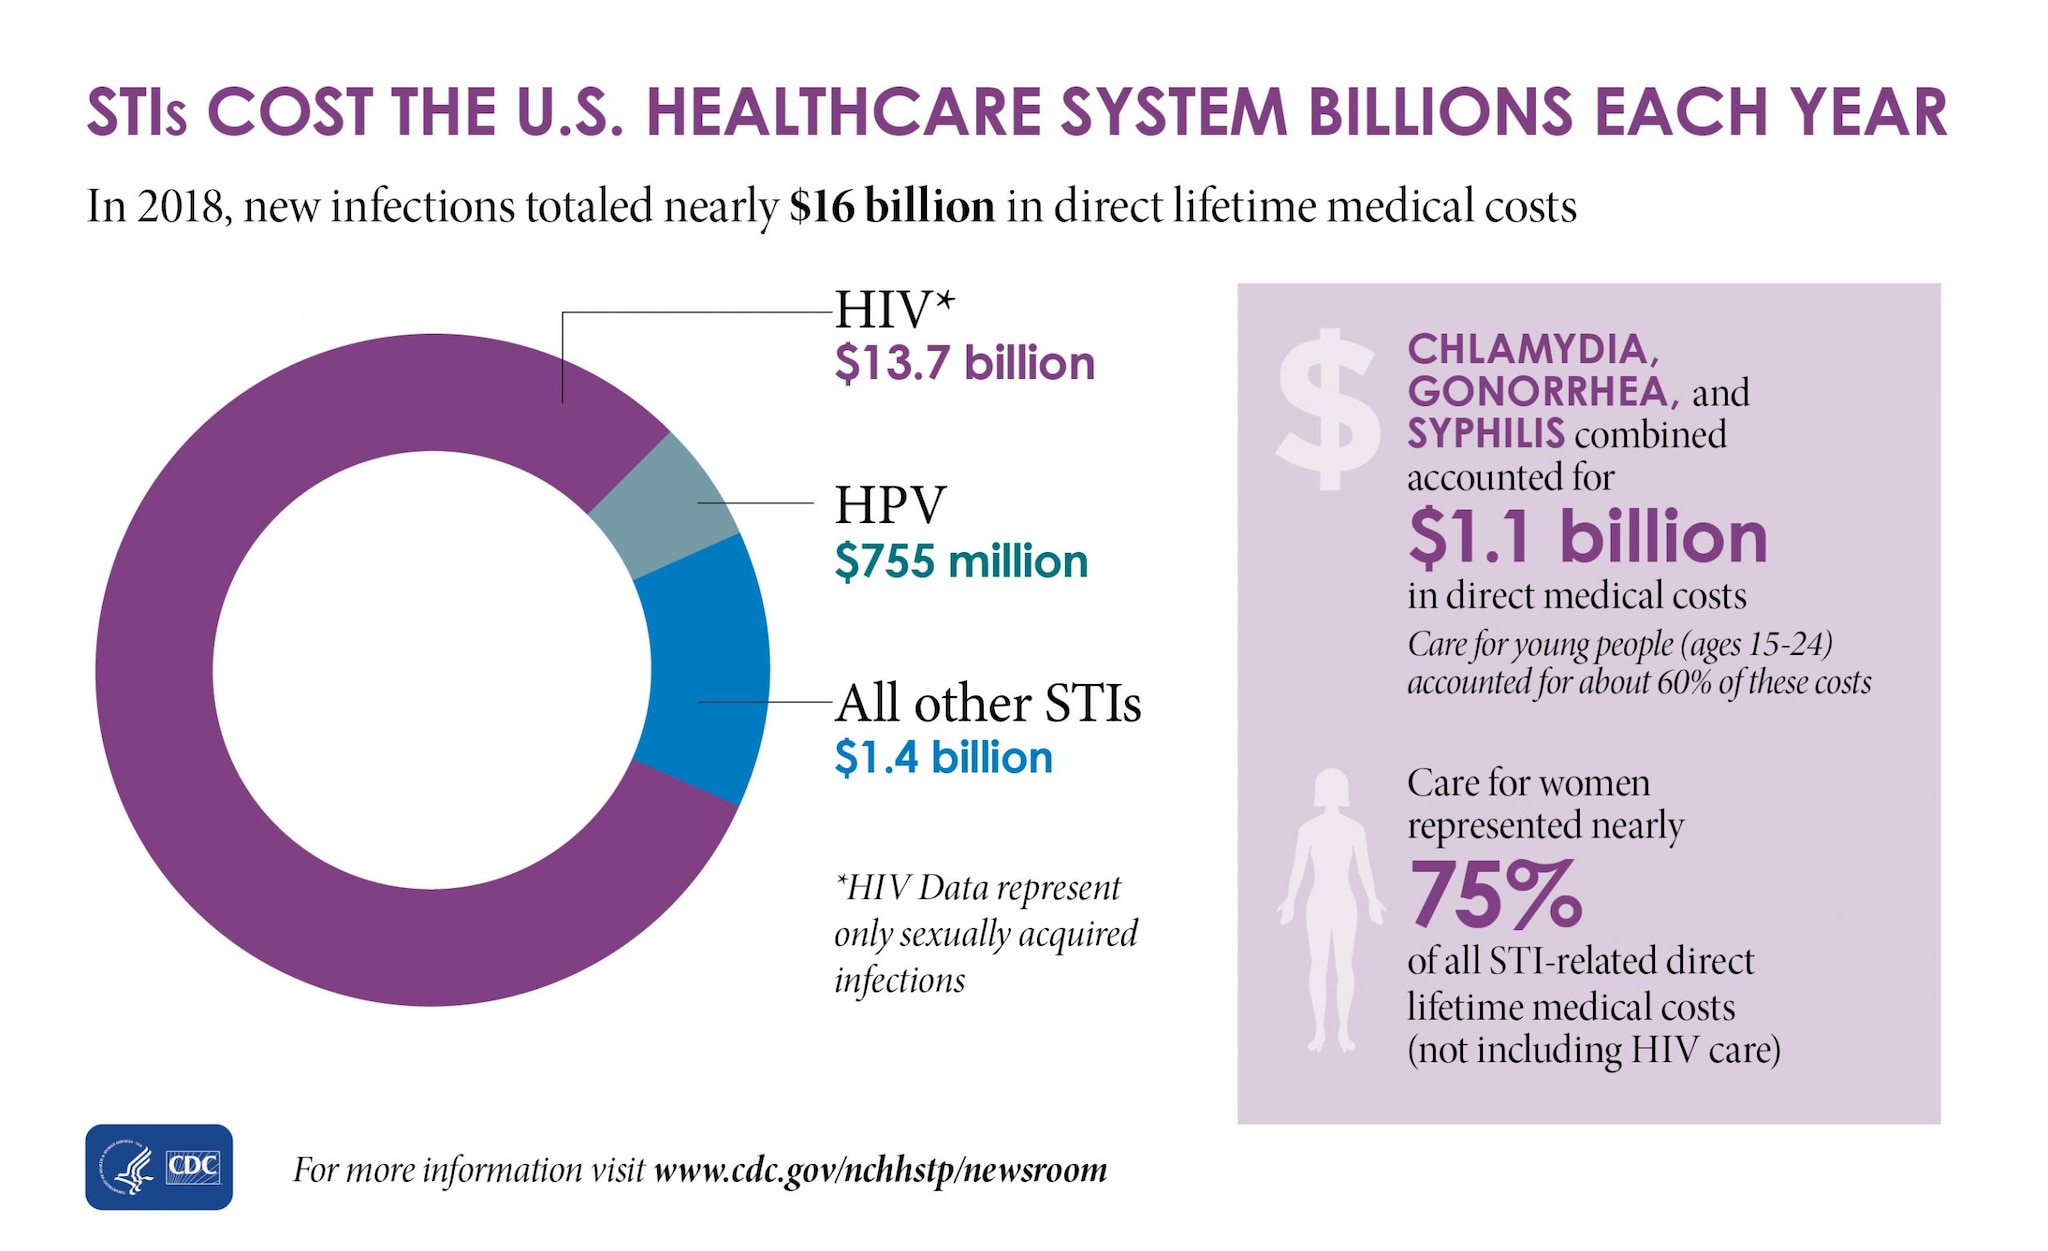 This graphic shows that in 2018, new HIV infections cost $13.7 billion in direct lifetime medical costs, new HPV infections cost $755 million in direct lifetime medical costs, and all other STIs cost $1.4 billion in direct lifetime medical costs.   This graphic shows that chlamydia, gonorrhea, and syphilis combined accounted for $1.1 billion in direct medical costs, and that care for young people (ages 15-24) accounted for about 60% of these costs.   This graphic shows that care for women represented nearly 75% of all STI-related direct lifetime medical costs (not including HIV care).   This graphic shows that HIV data represent only sexually acquired infections. 